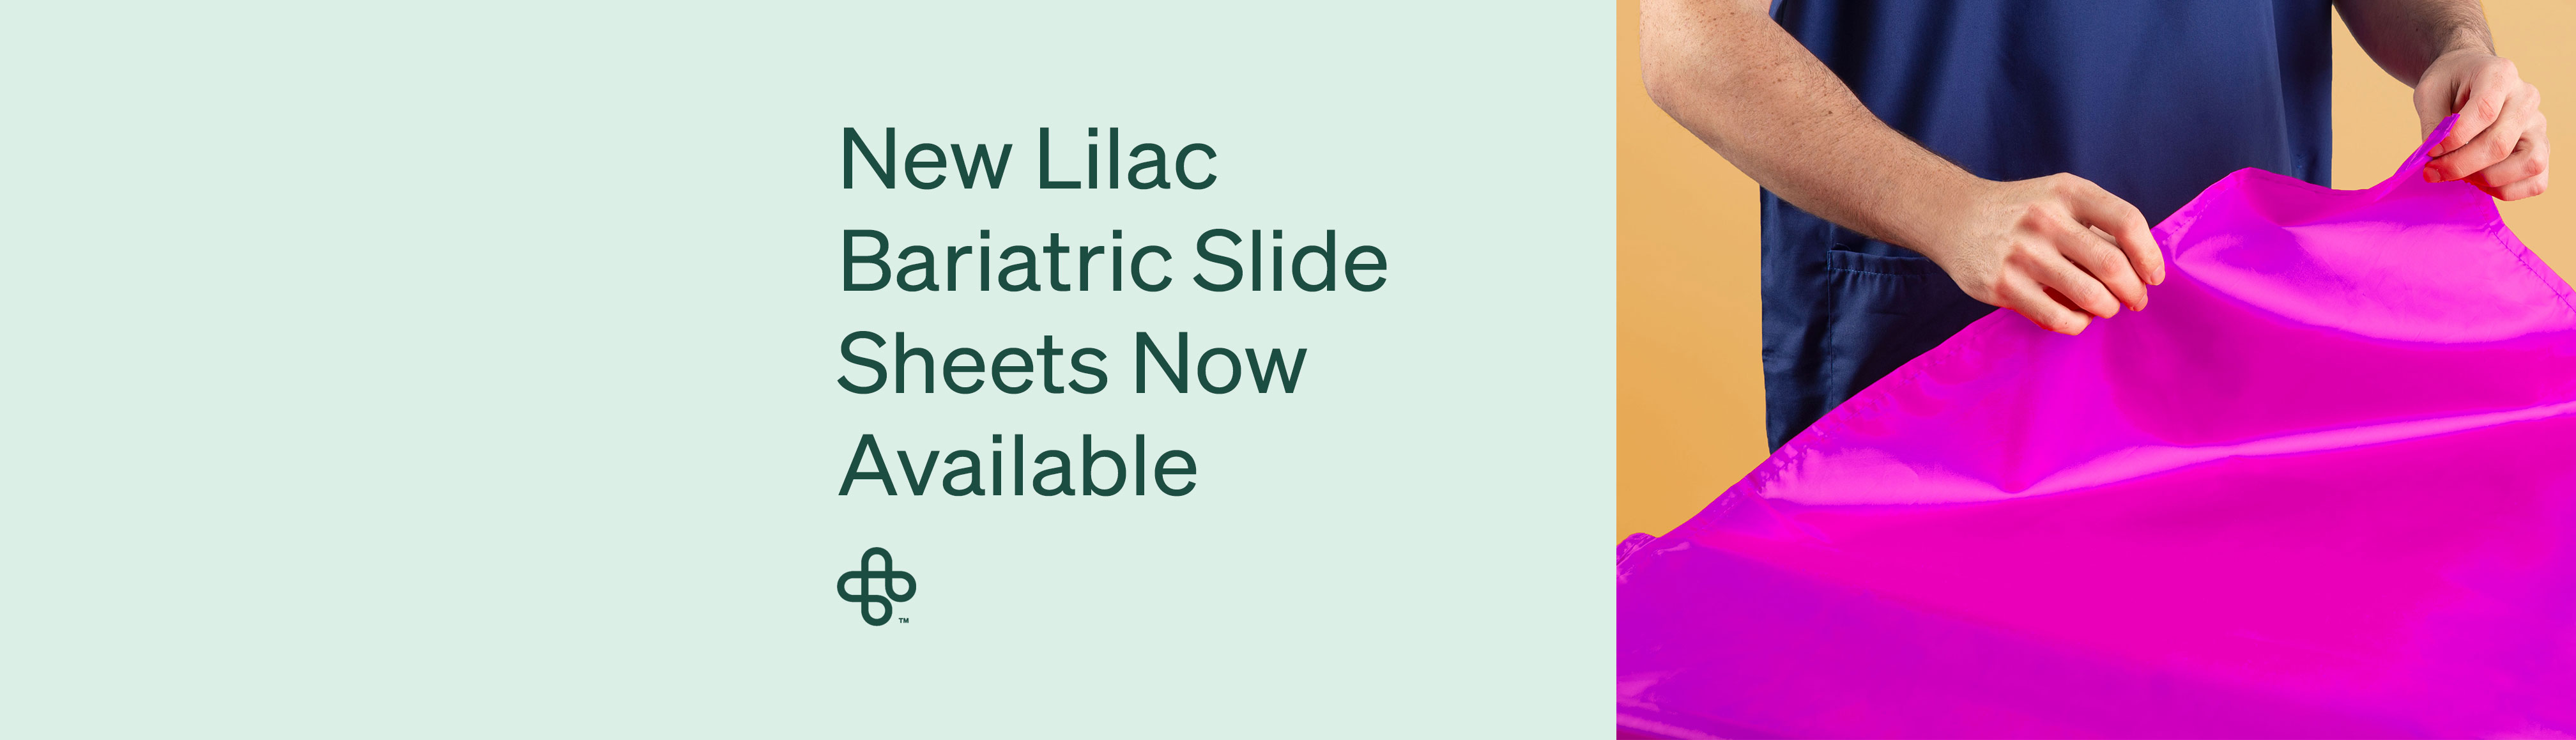 New Lilac Bariatric Slide Sheets Now Available